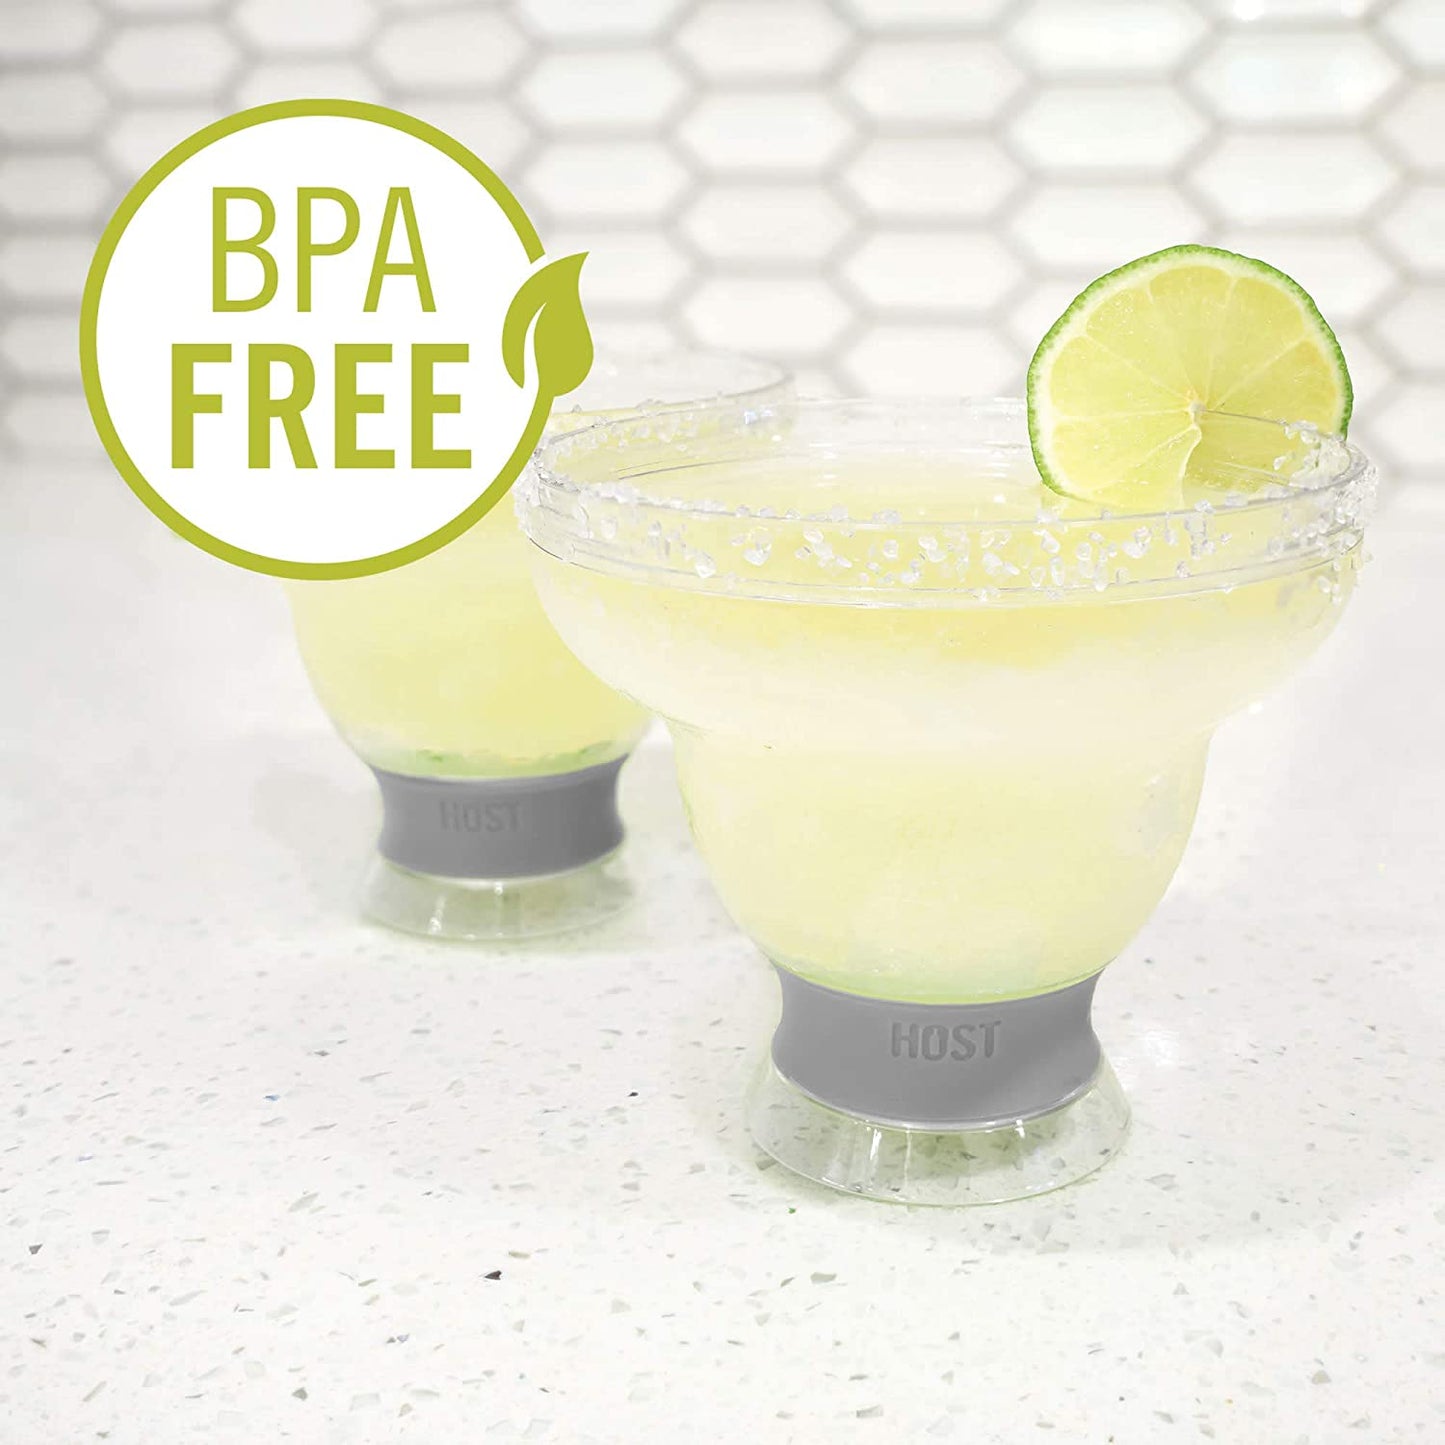 Freeze Stemless Margarita Glasses Double Walled Insulated Gel Chiller Plastic Margarita Glass Cups - Frozen Cocktail Glass Set of 2 12 Oz, Grey